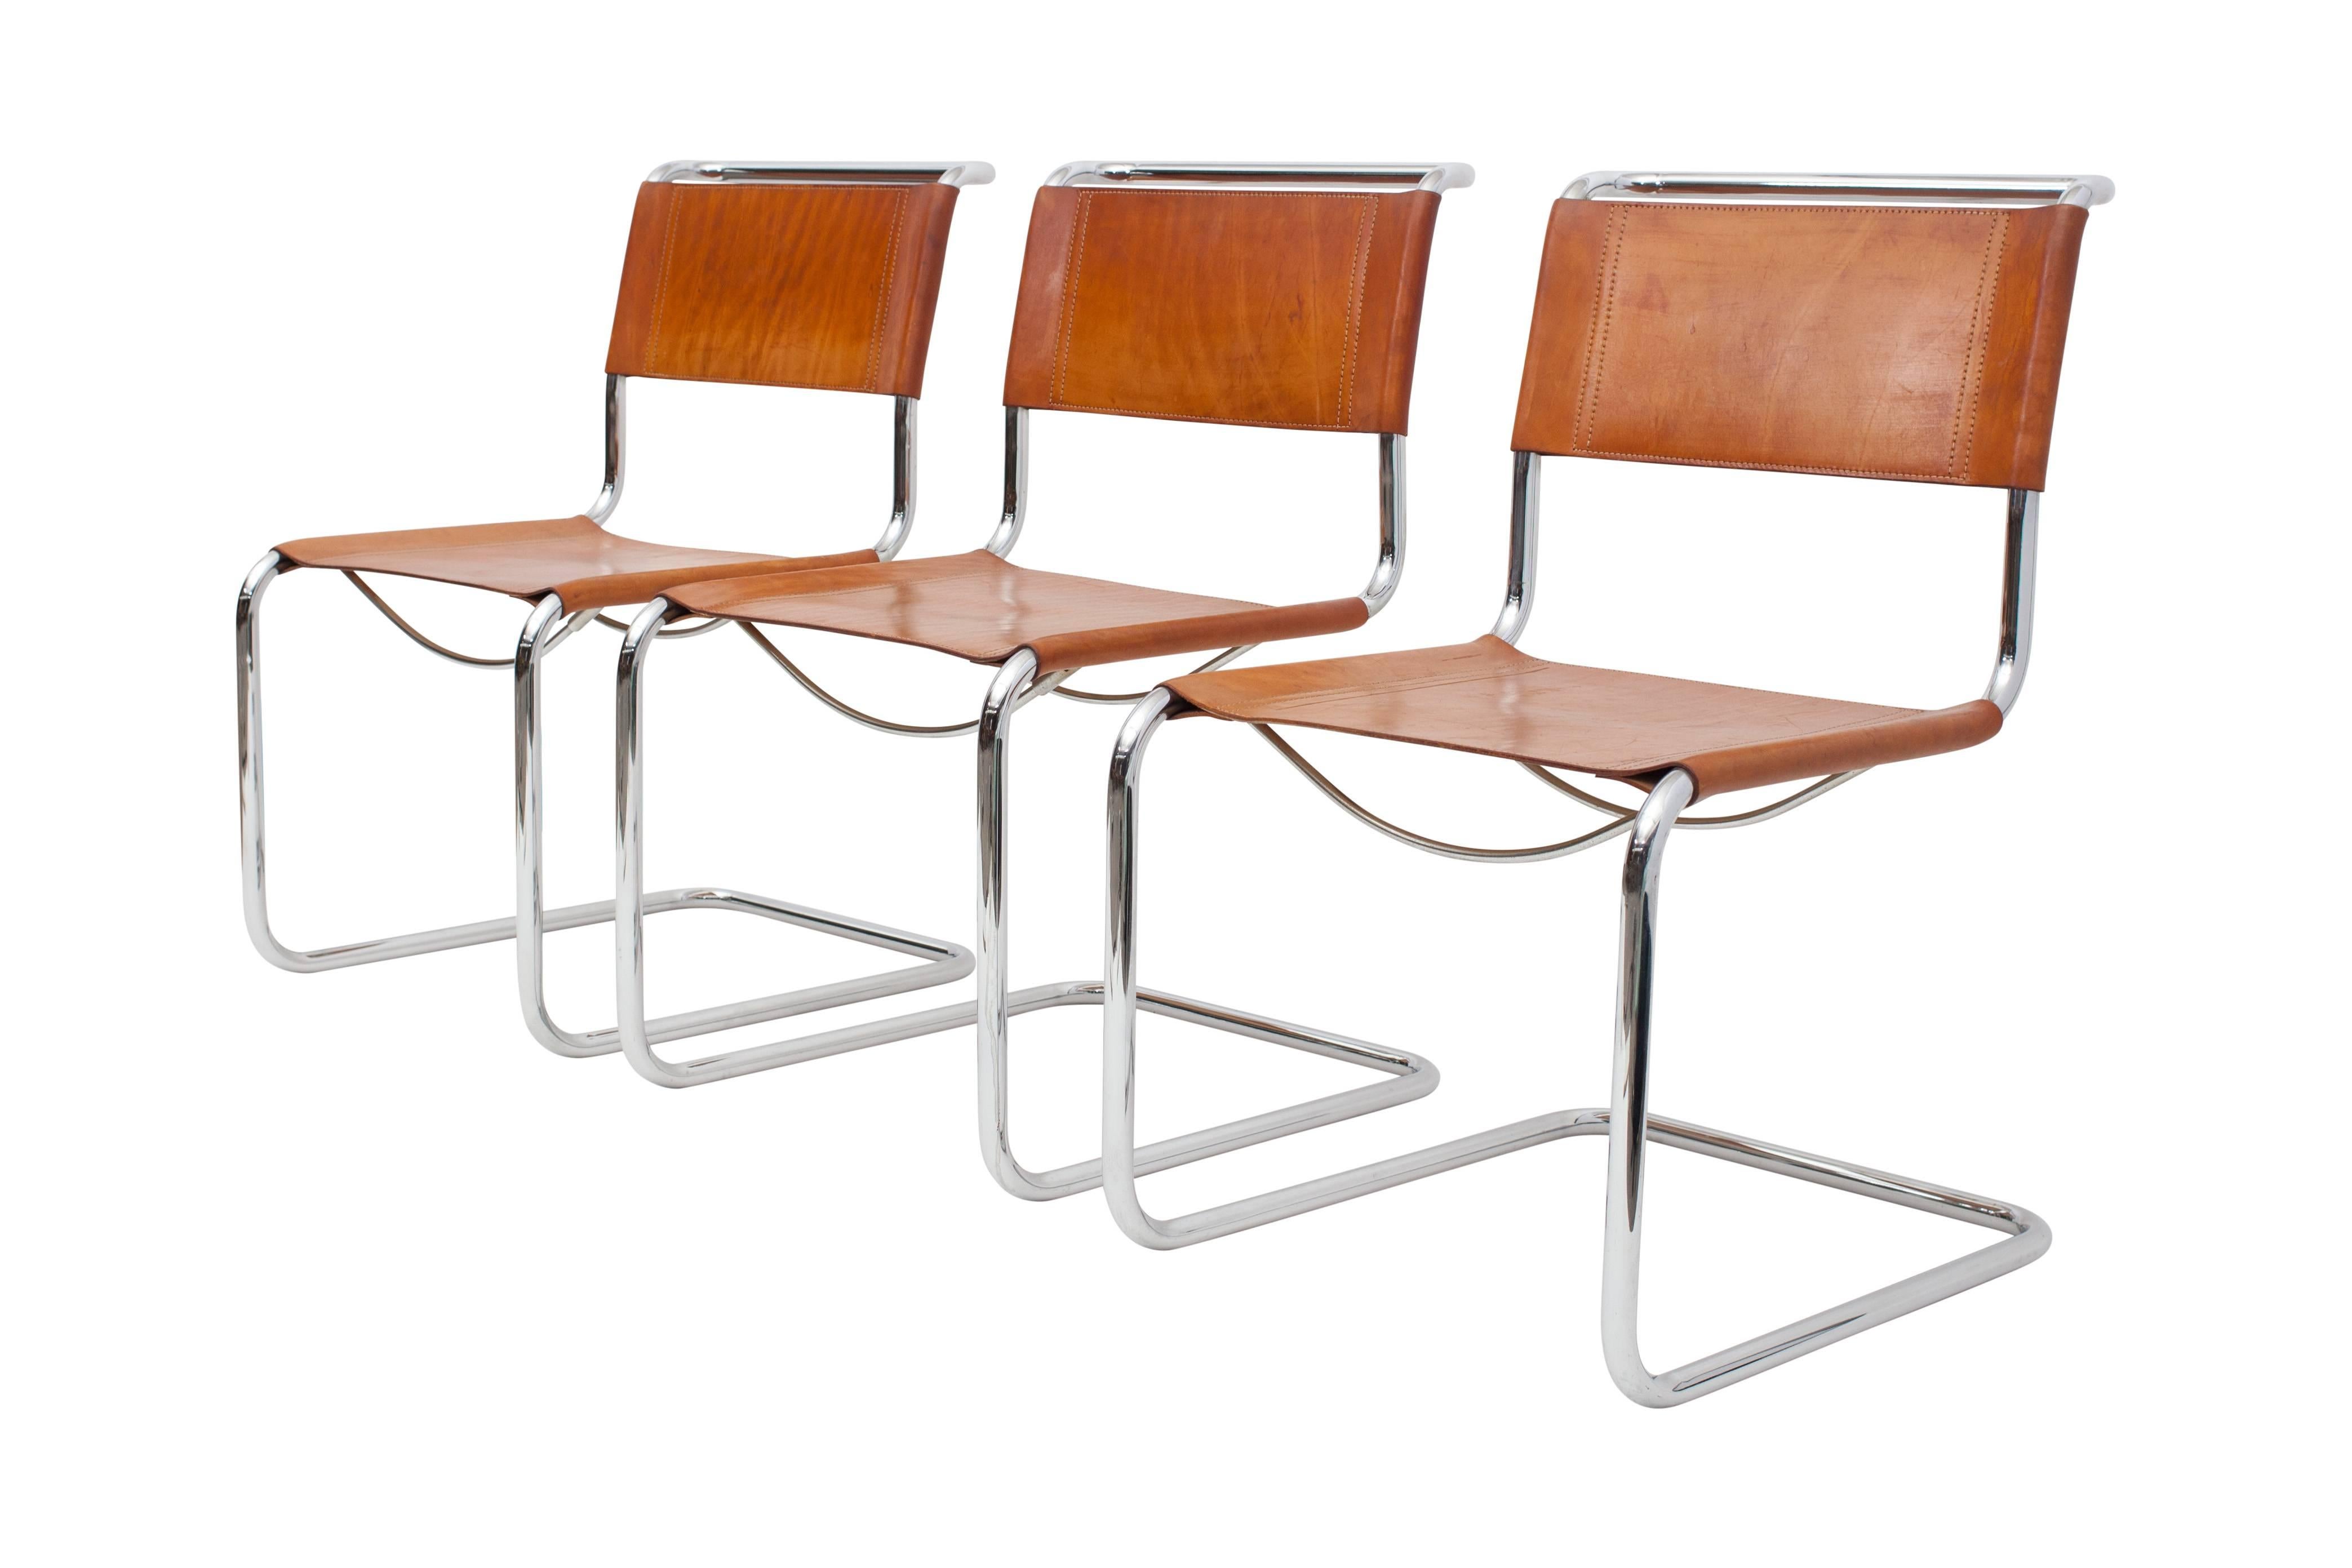 Tubular Cantilever Chairs with Cognac Leather Seating 1